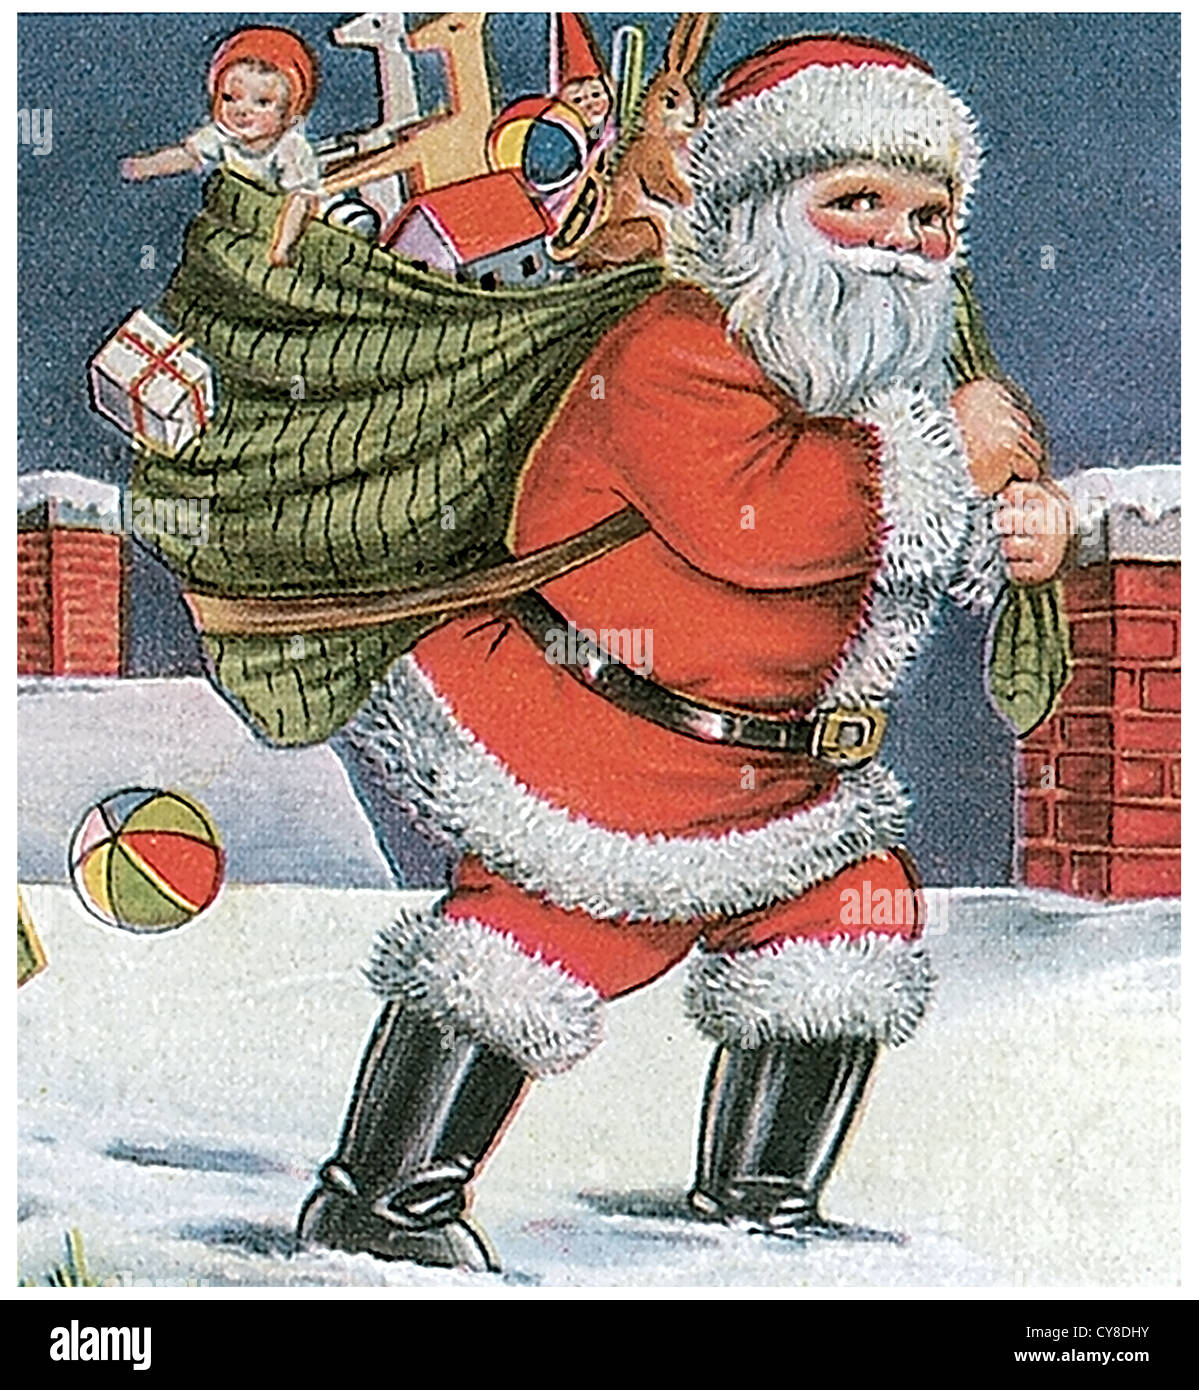 Santa Claus on a roof Stock Photo